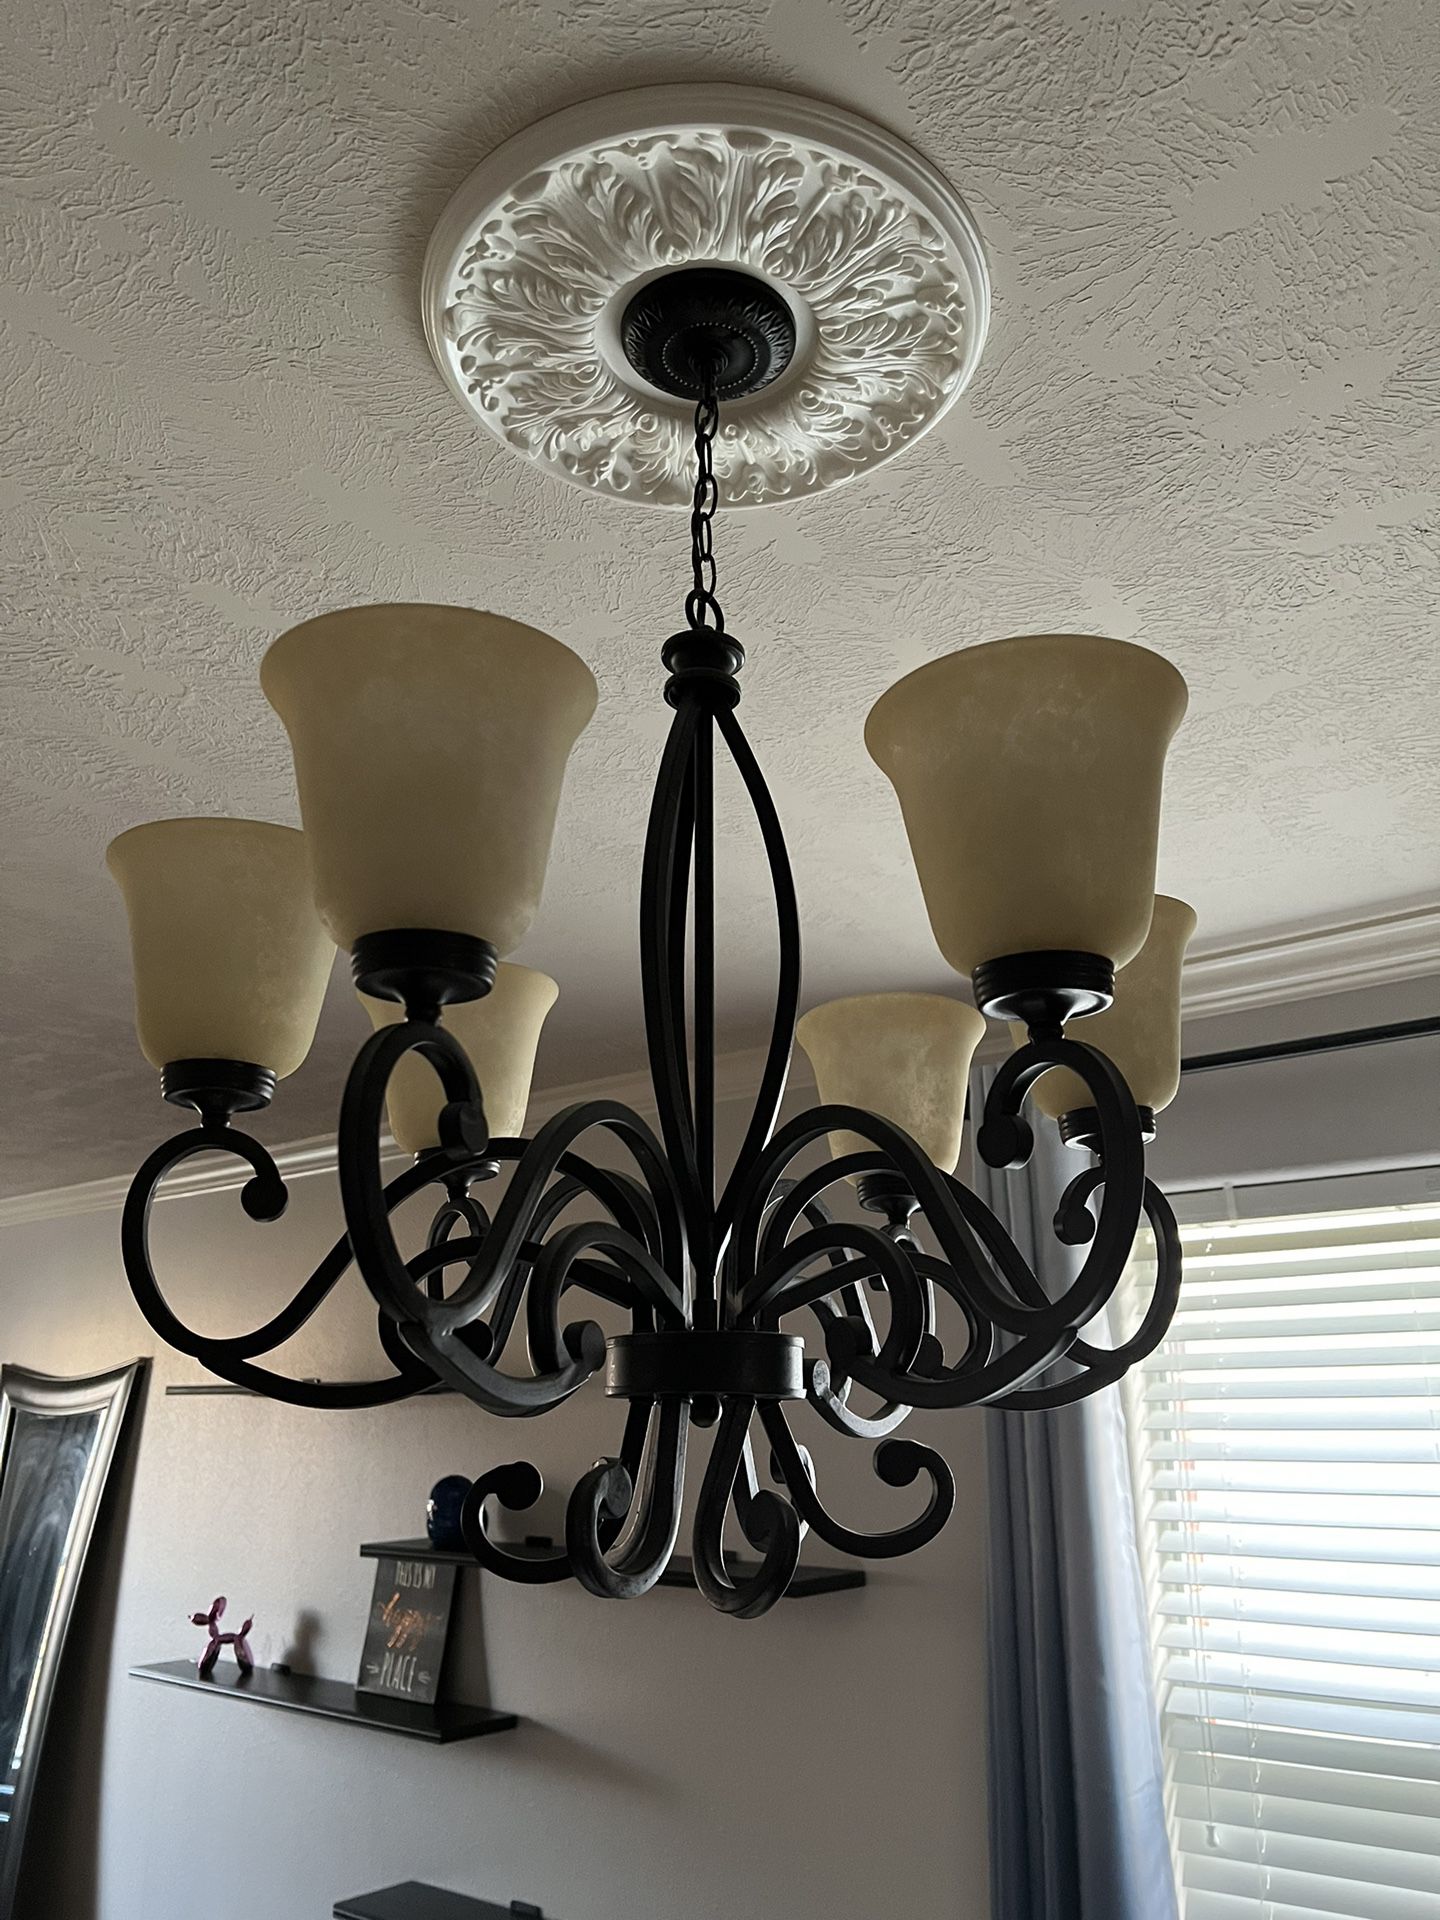 Wrought Iron Chandelier 6 Up light Lamps 